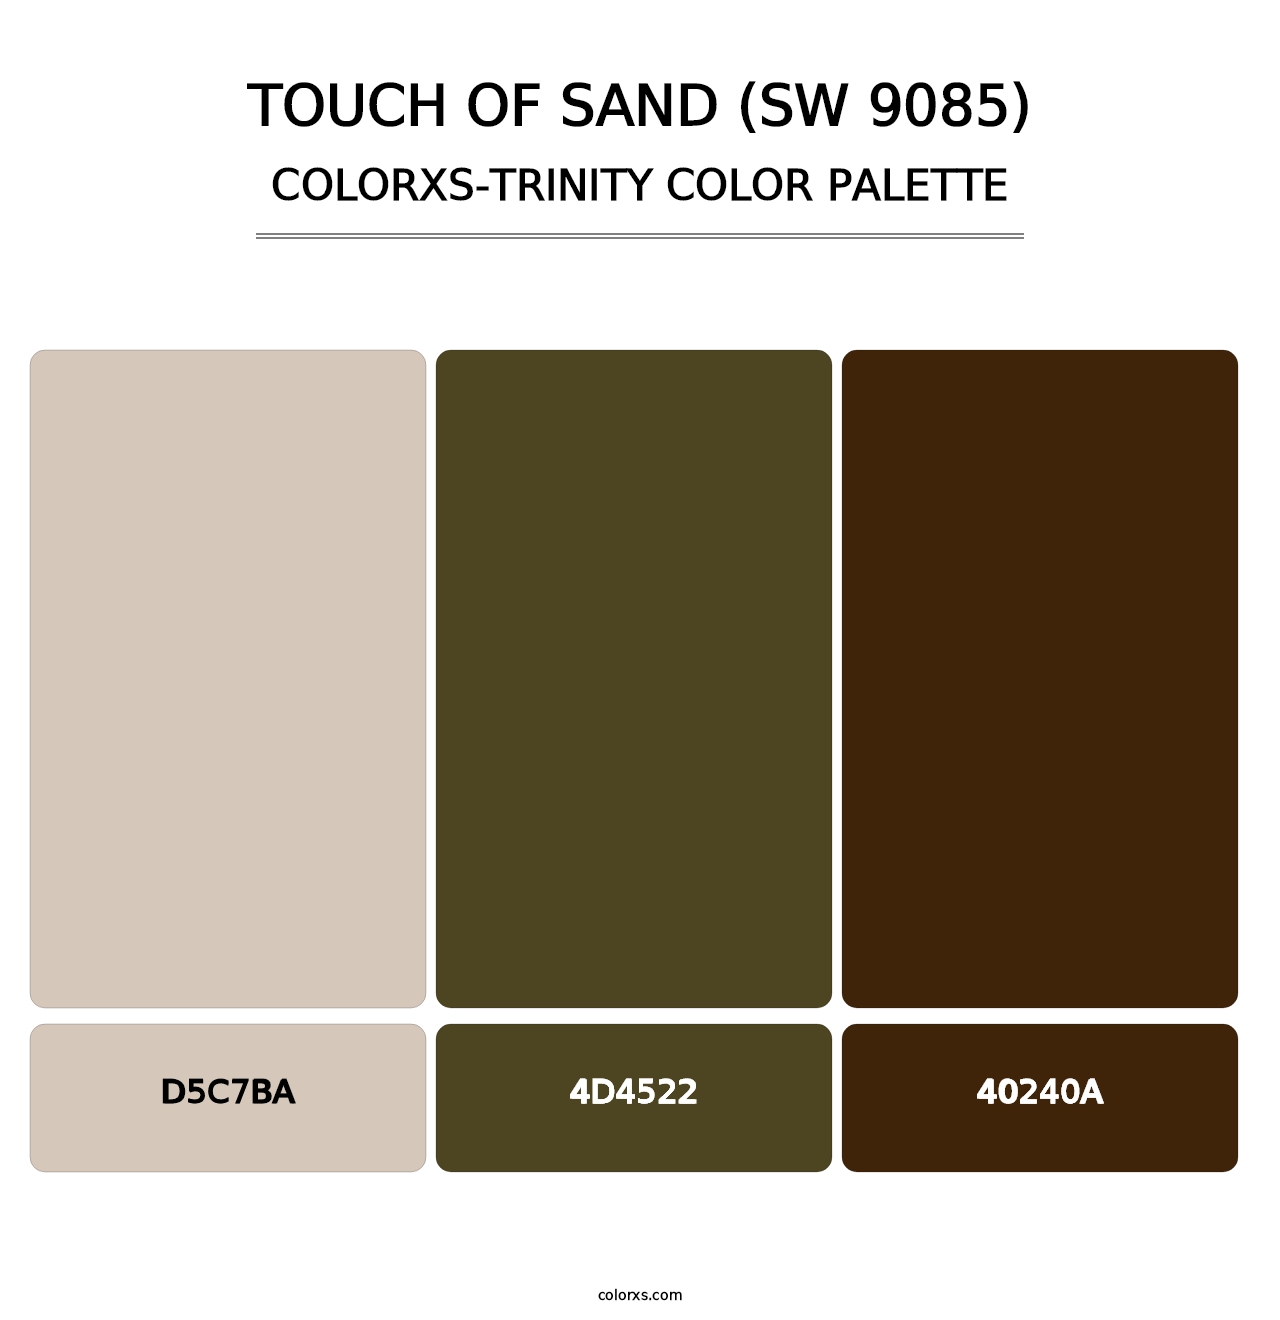 Touch of Sand (SW 9085) - Colorxs Trinity Palette